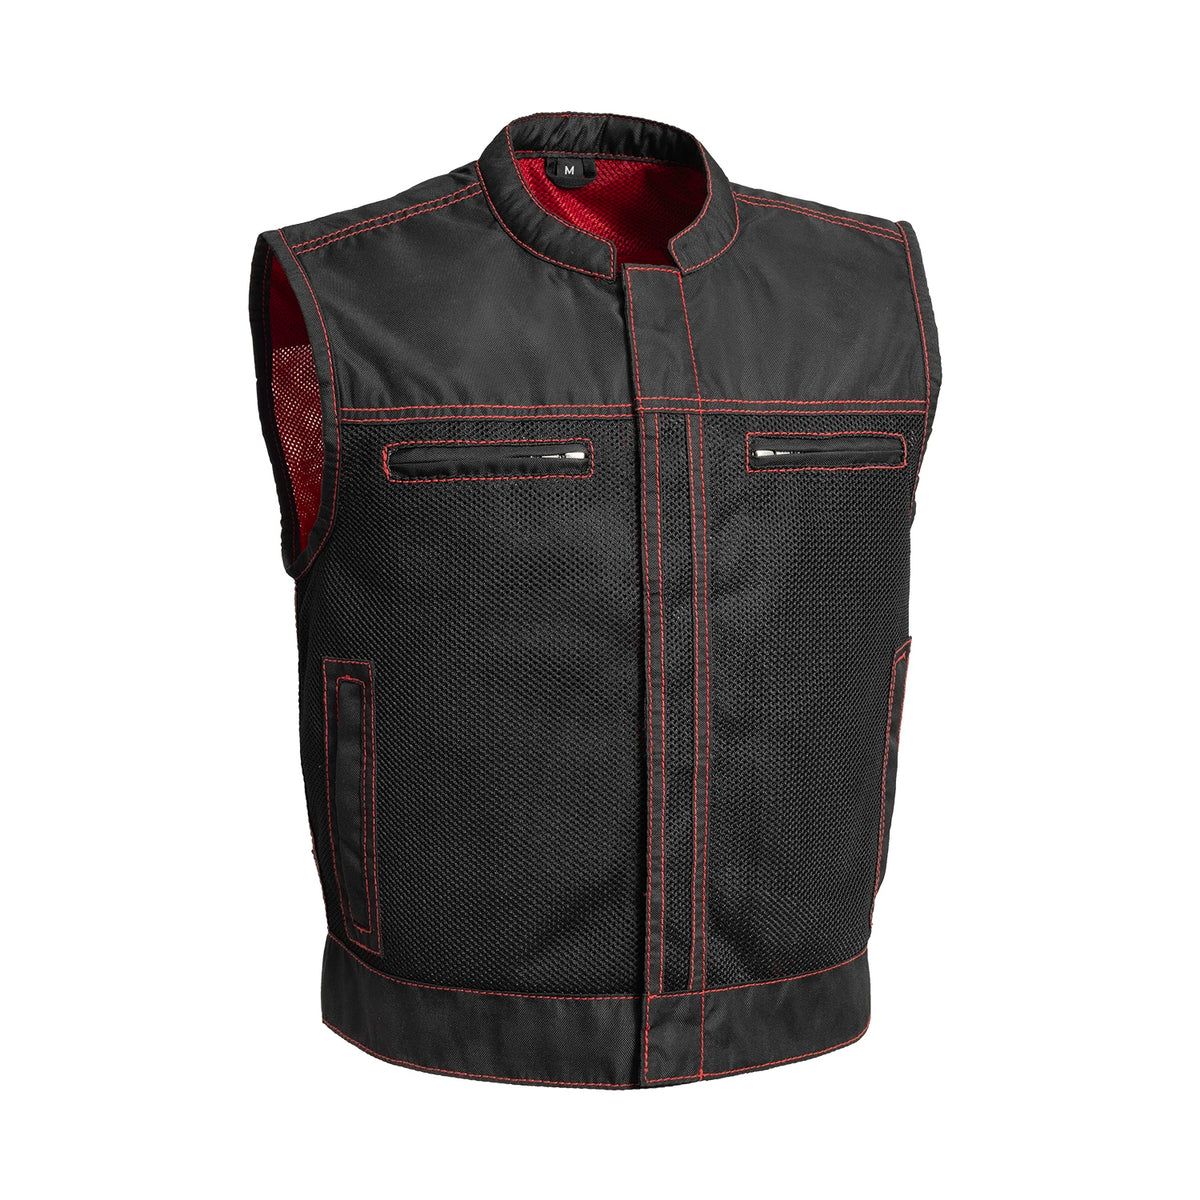 Lowrider Moto Mesh Men's Motorcycle Vest Men's Leather Vest First Manufacturing Company Black Red S 